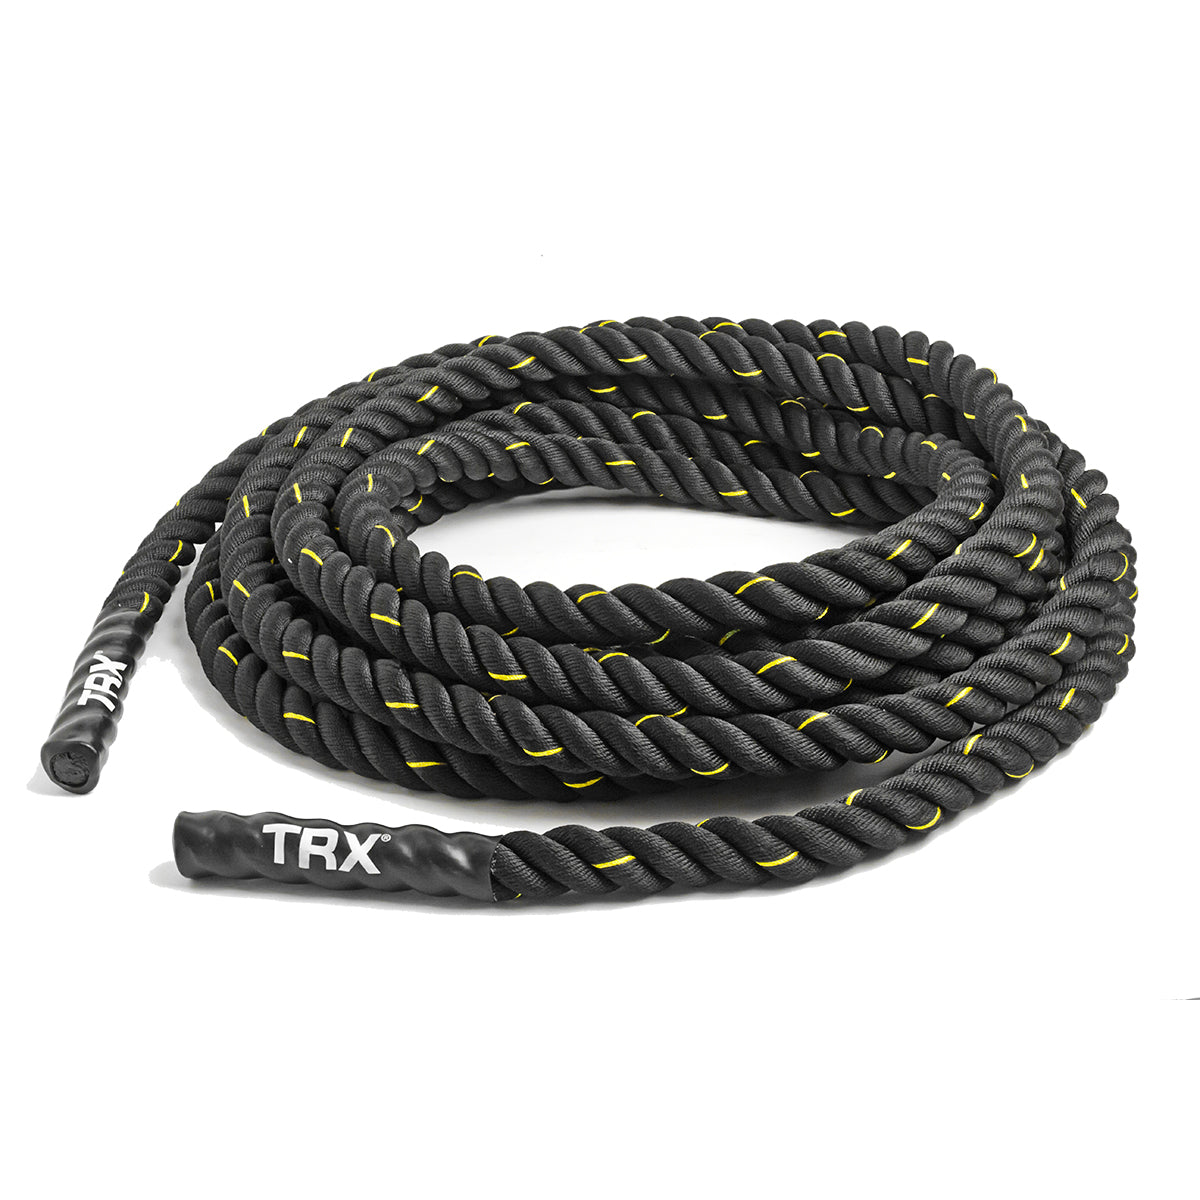 Workout Fitness Climbing Rope Gym Exercise Battle Rope 15' Ft in Black